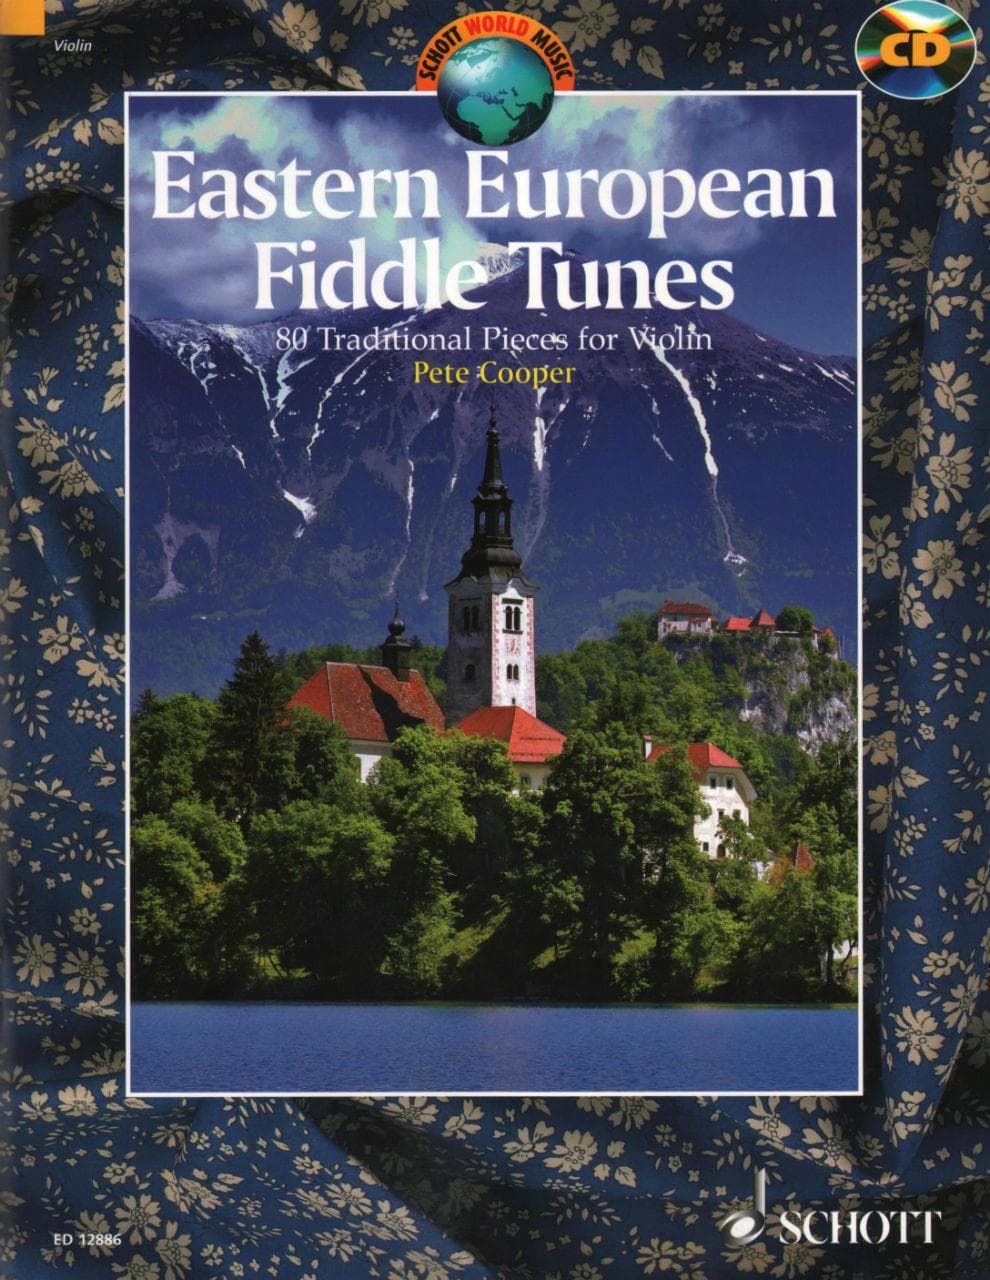 80 Eastern European Fiddle Tunes by Pete Cooper with CD